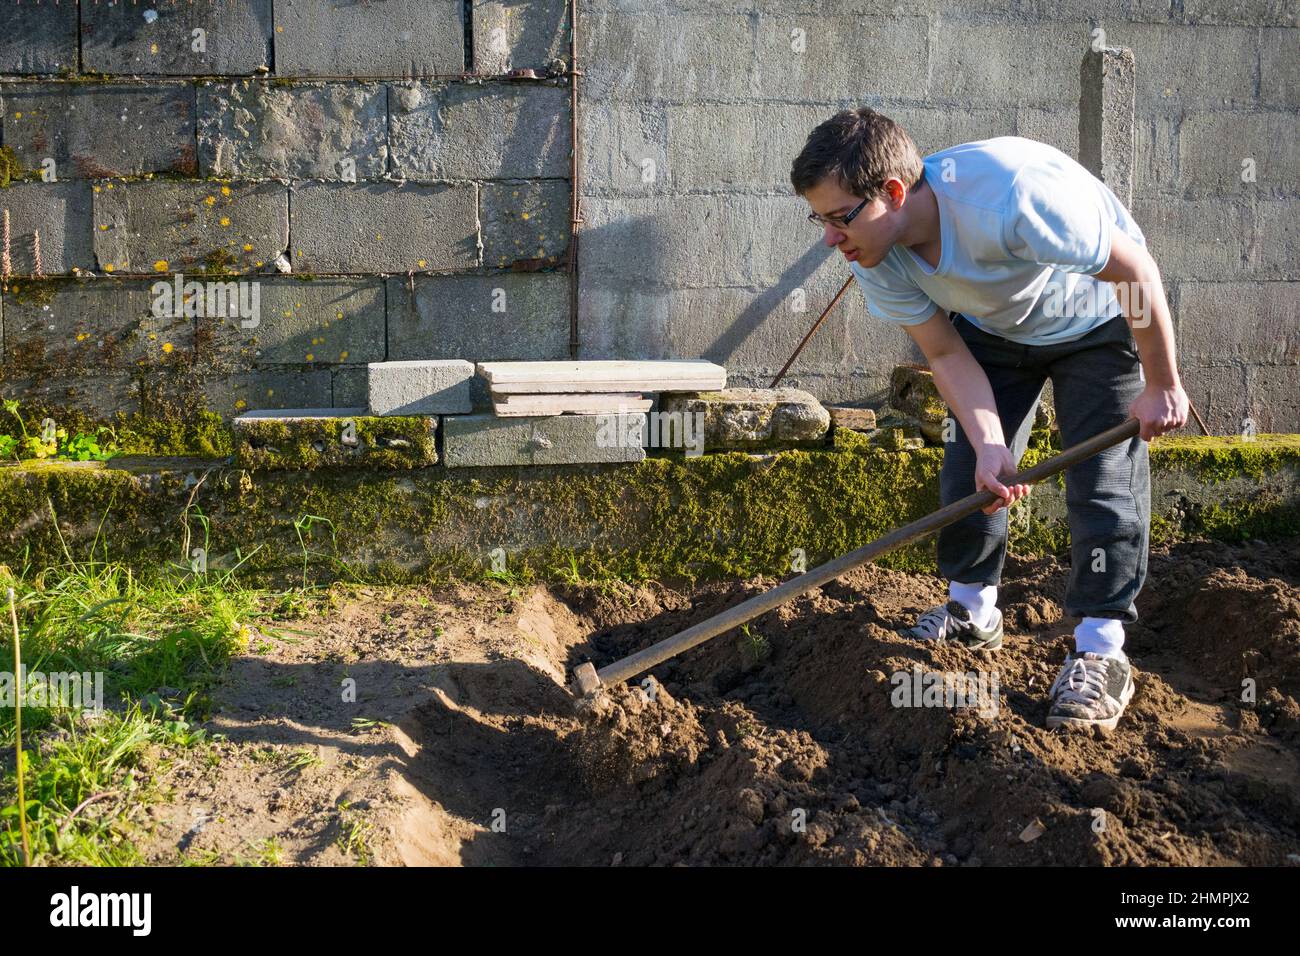 Young man digging soil in a garden, Spain Stock Photo